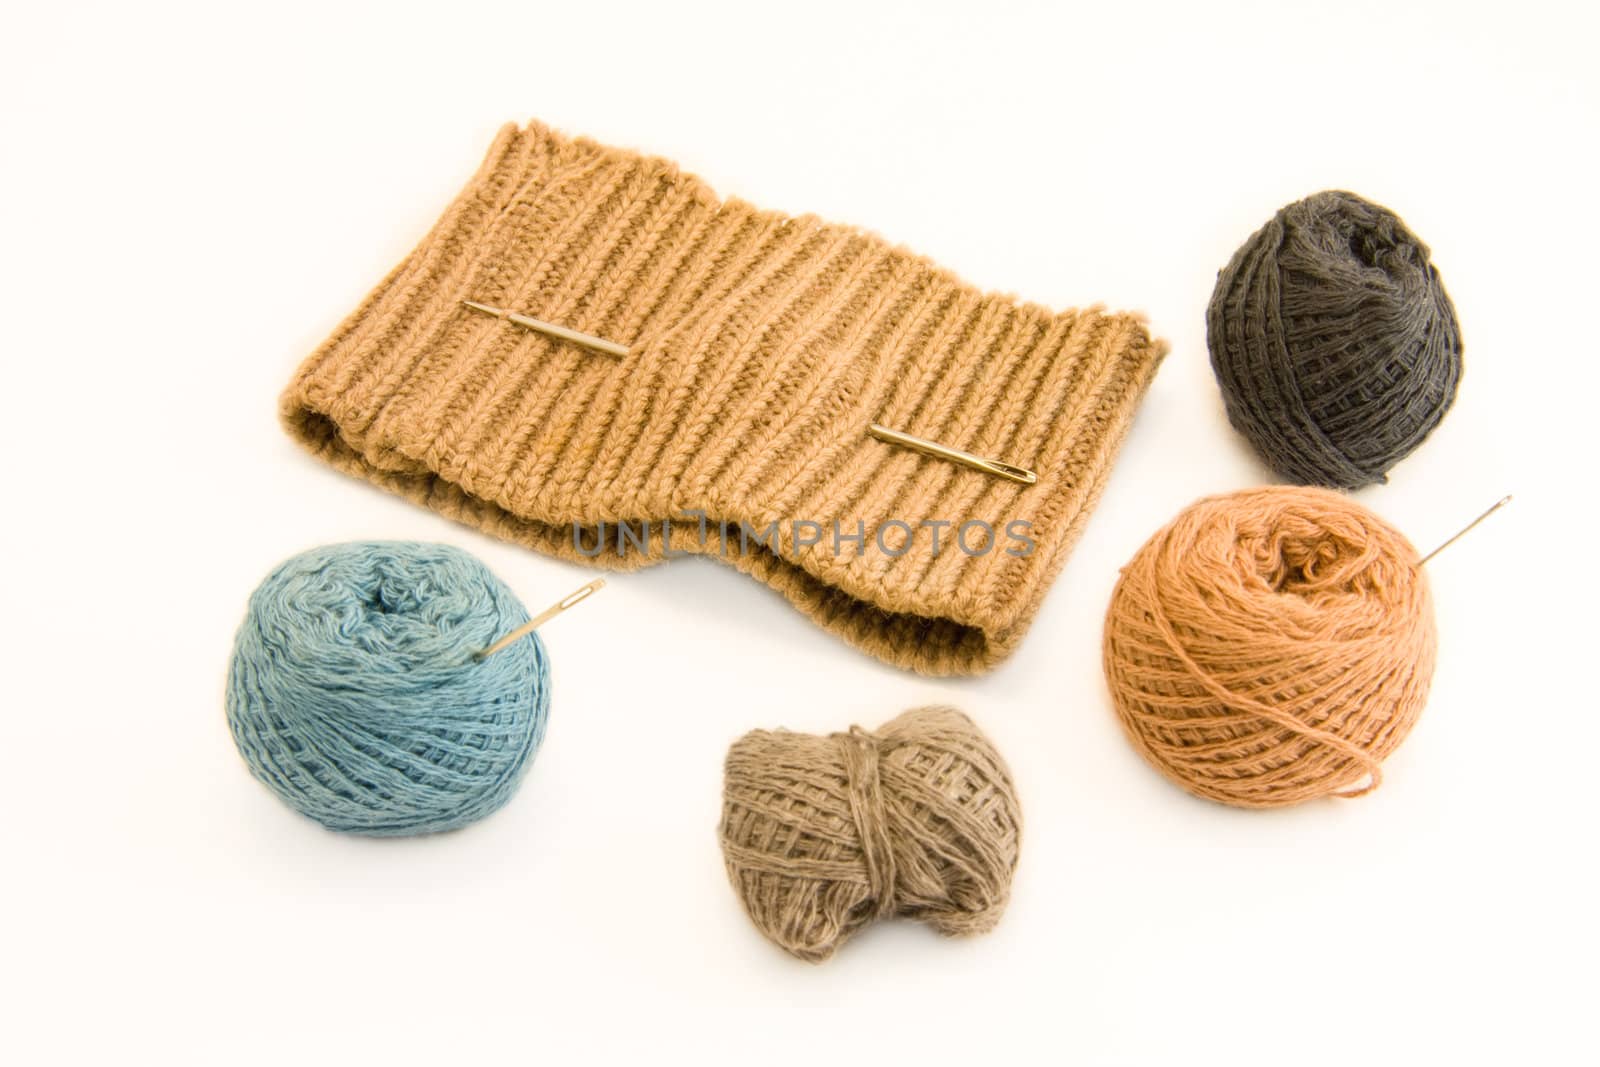 Knitted garment and skeins of yarn on isolated white